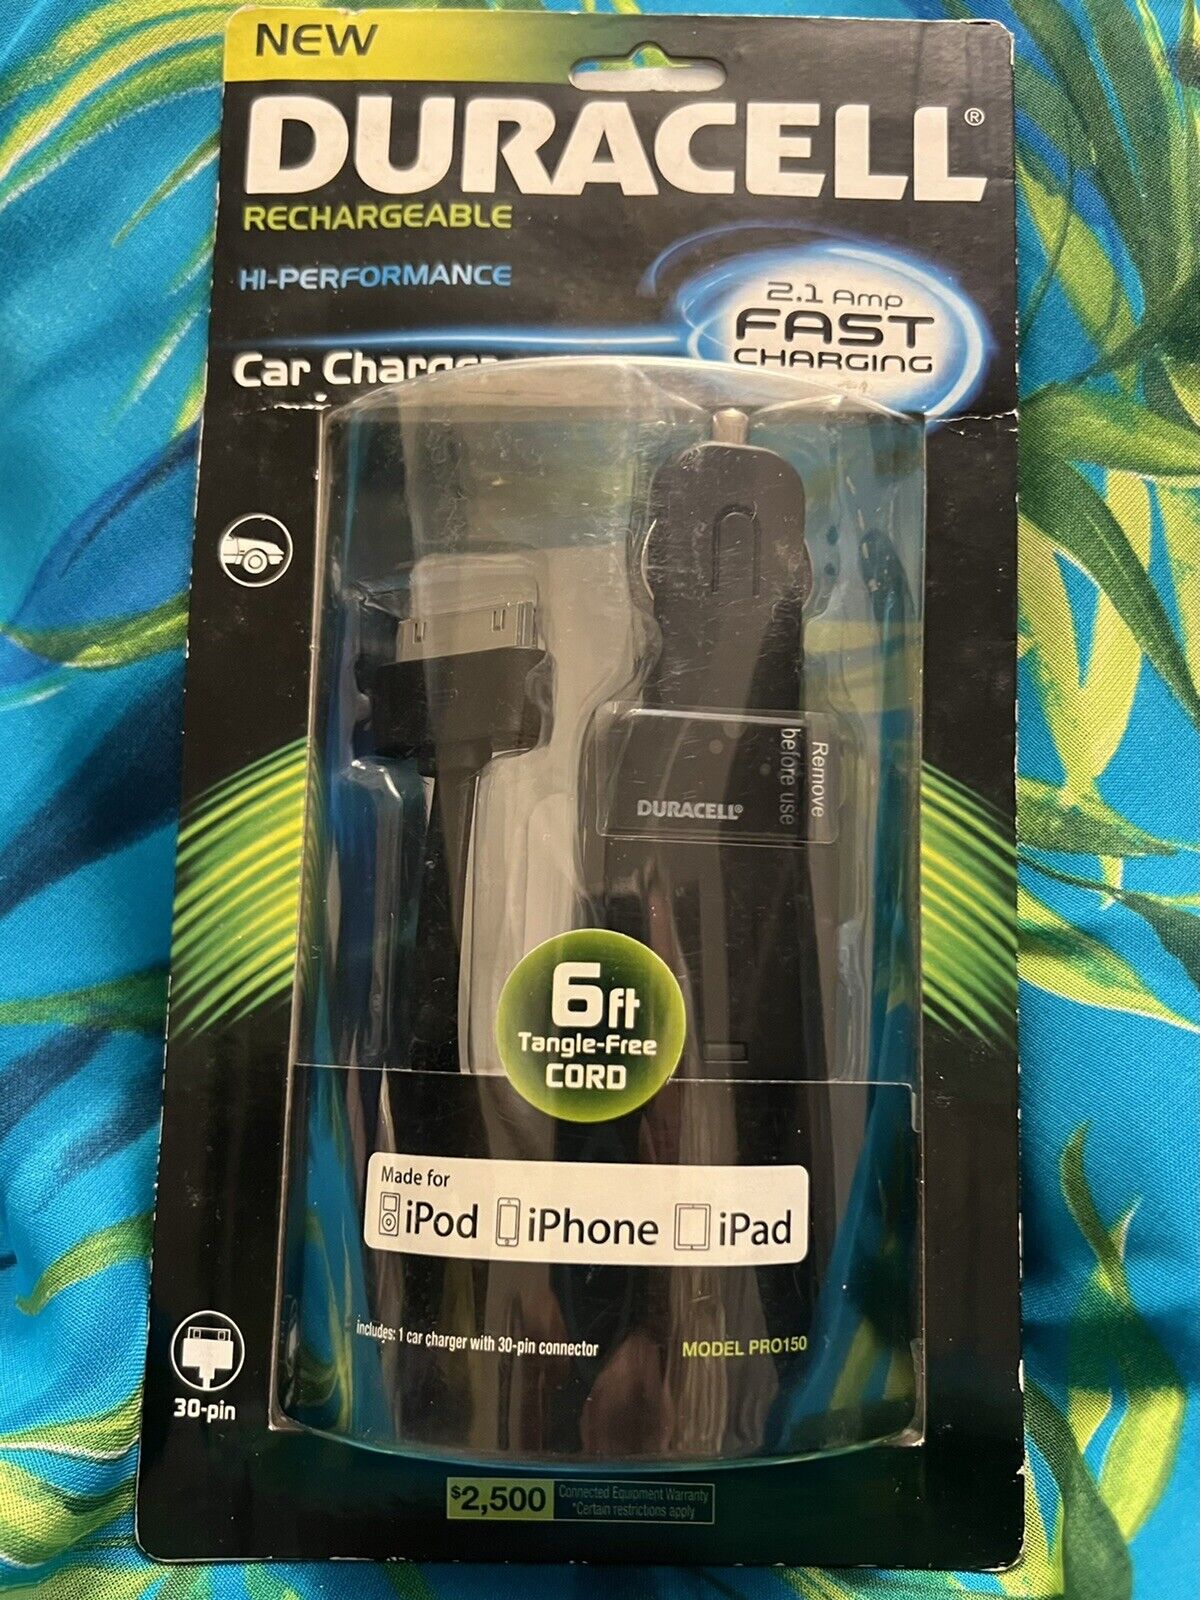 ⚡️ Duracell Cell Phone 2.1 Amp ⚡️Fast Car Charger iPhone iPad iPod 30 Pin ⚡️NEW